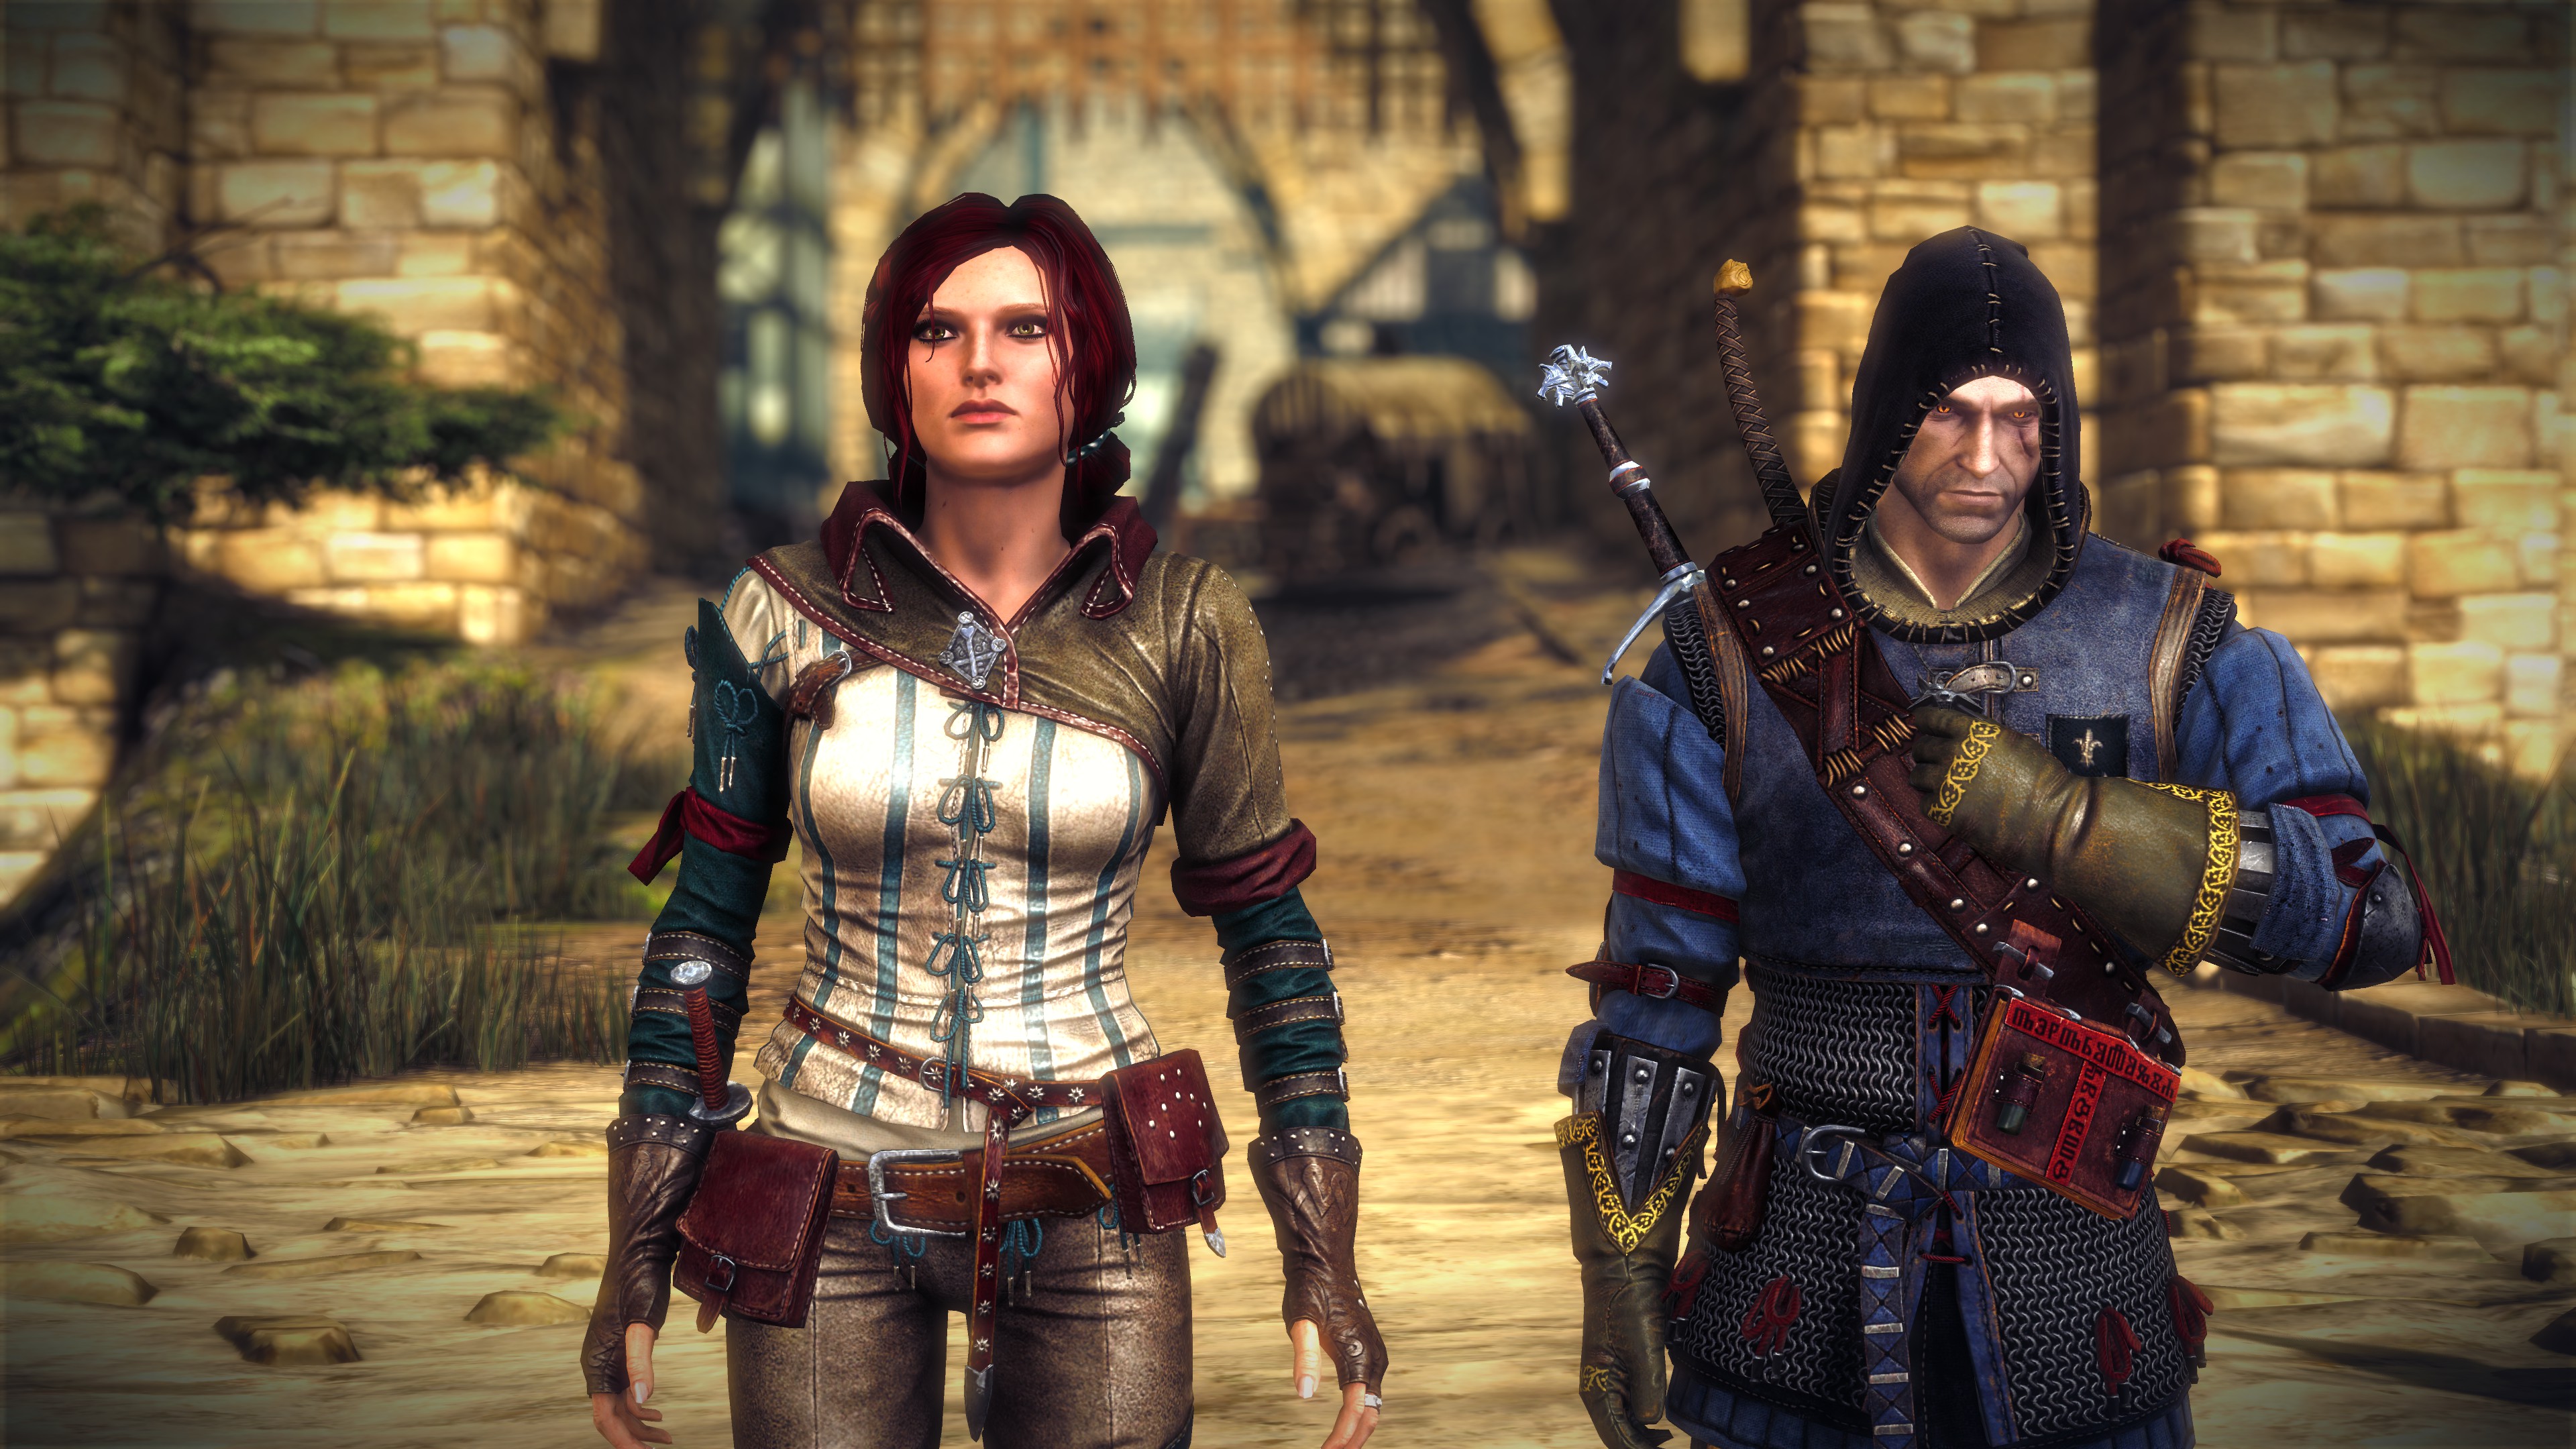 The Witcher 2 Review: Graphics - The Witcher 2: Assassins of Kings